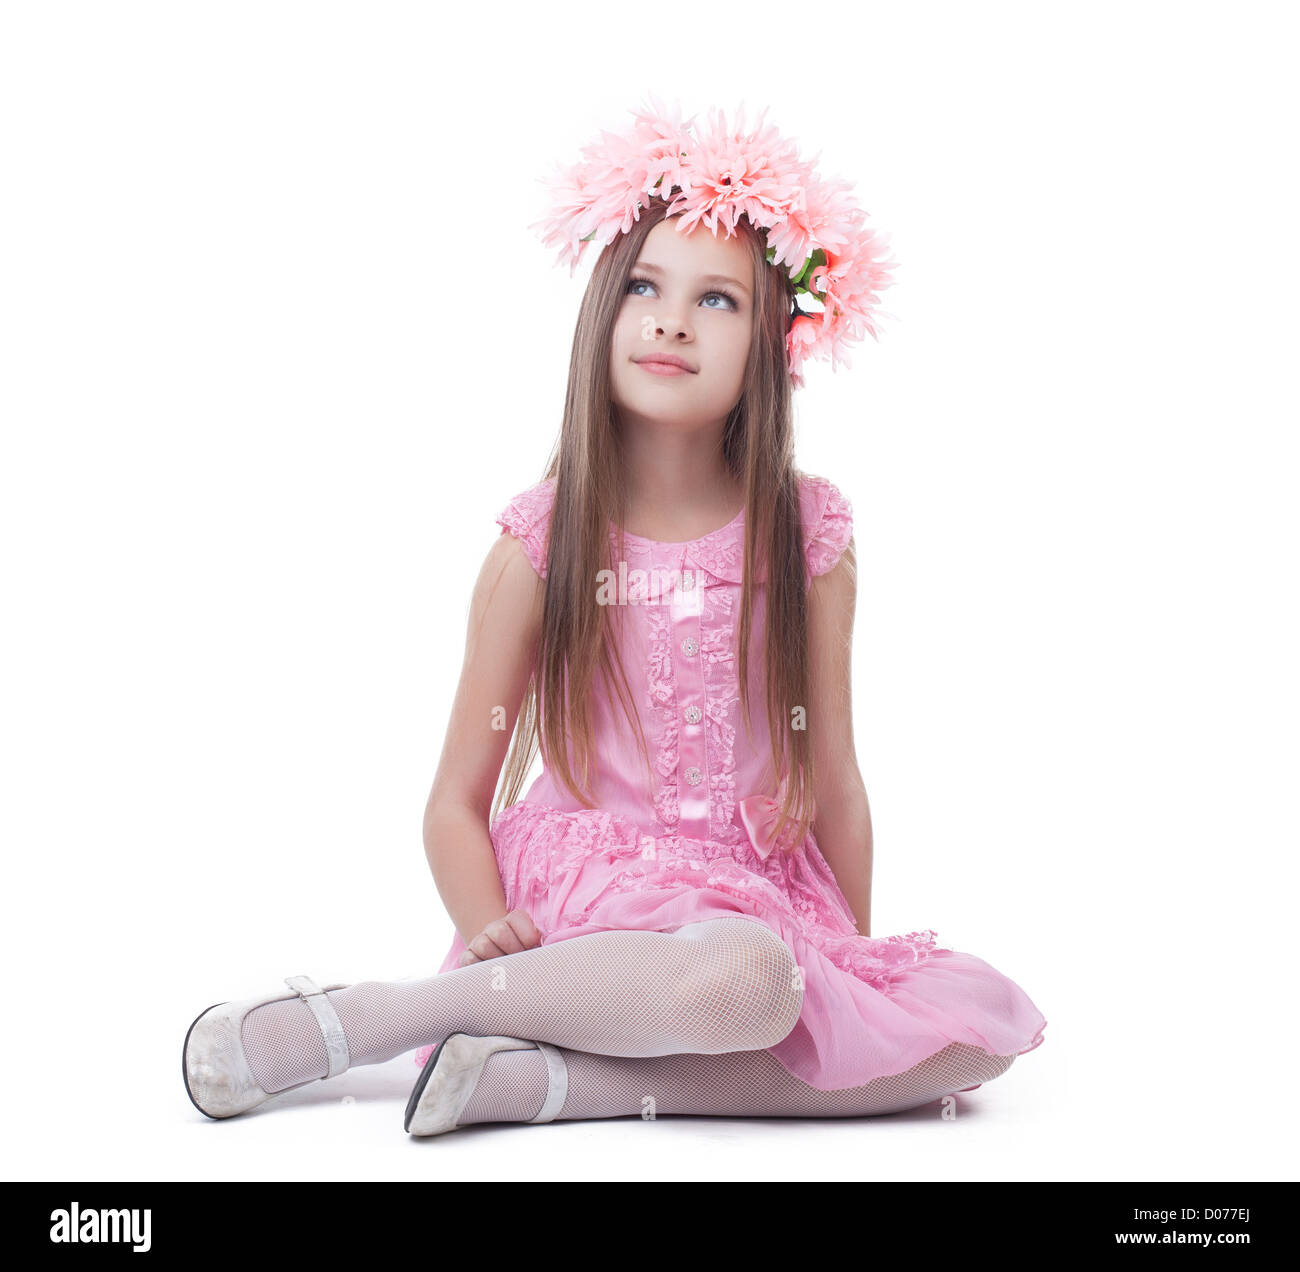 Little girl in pink dress and wreath sitting on floor. Isolated on ...